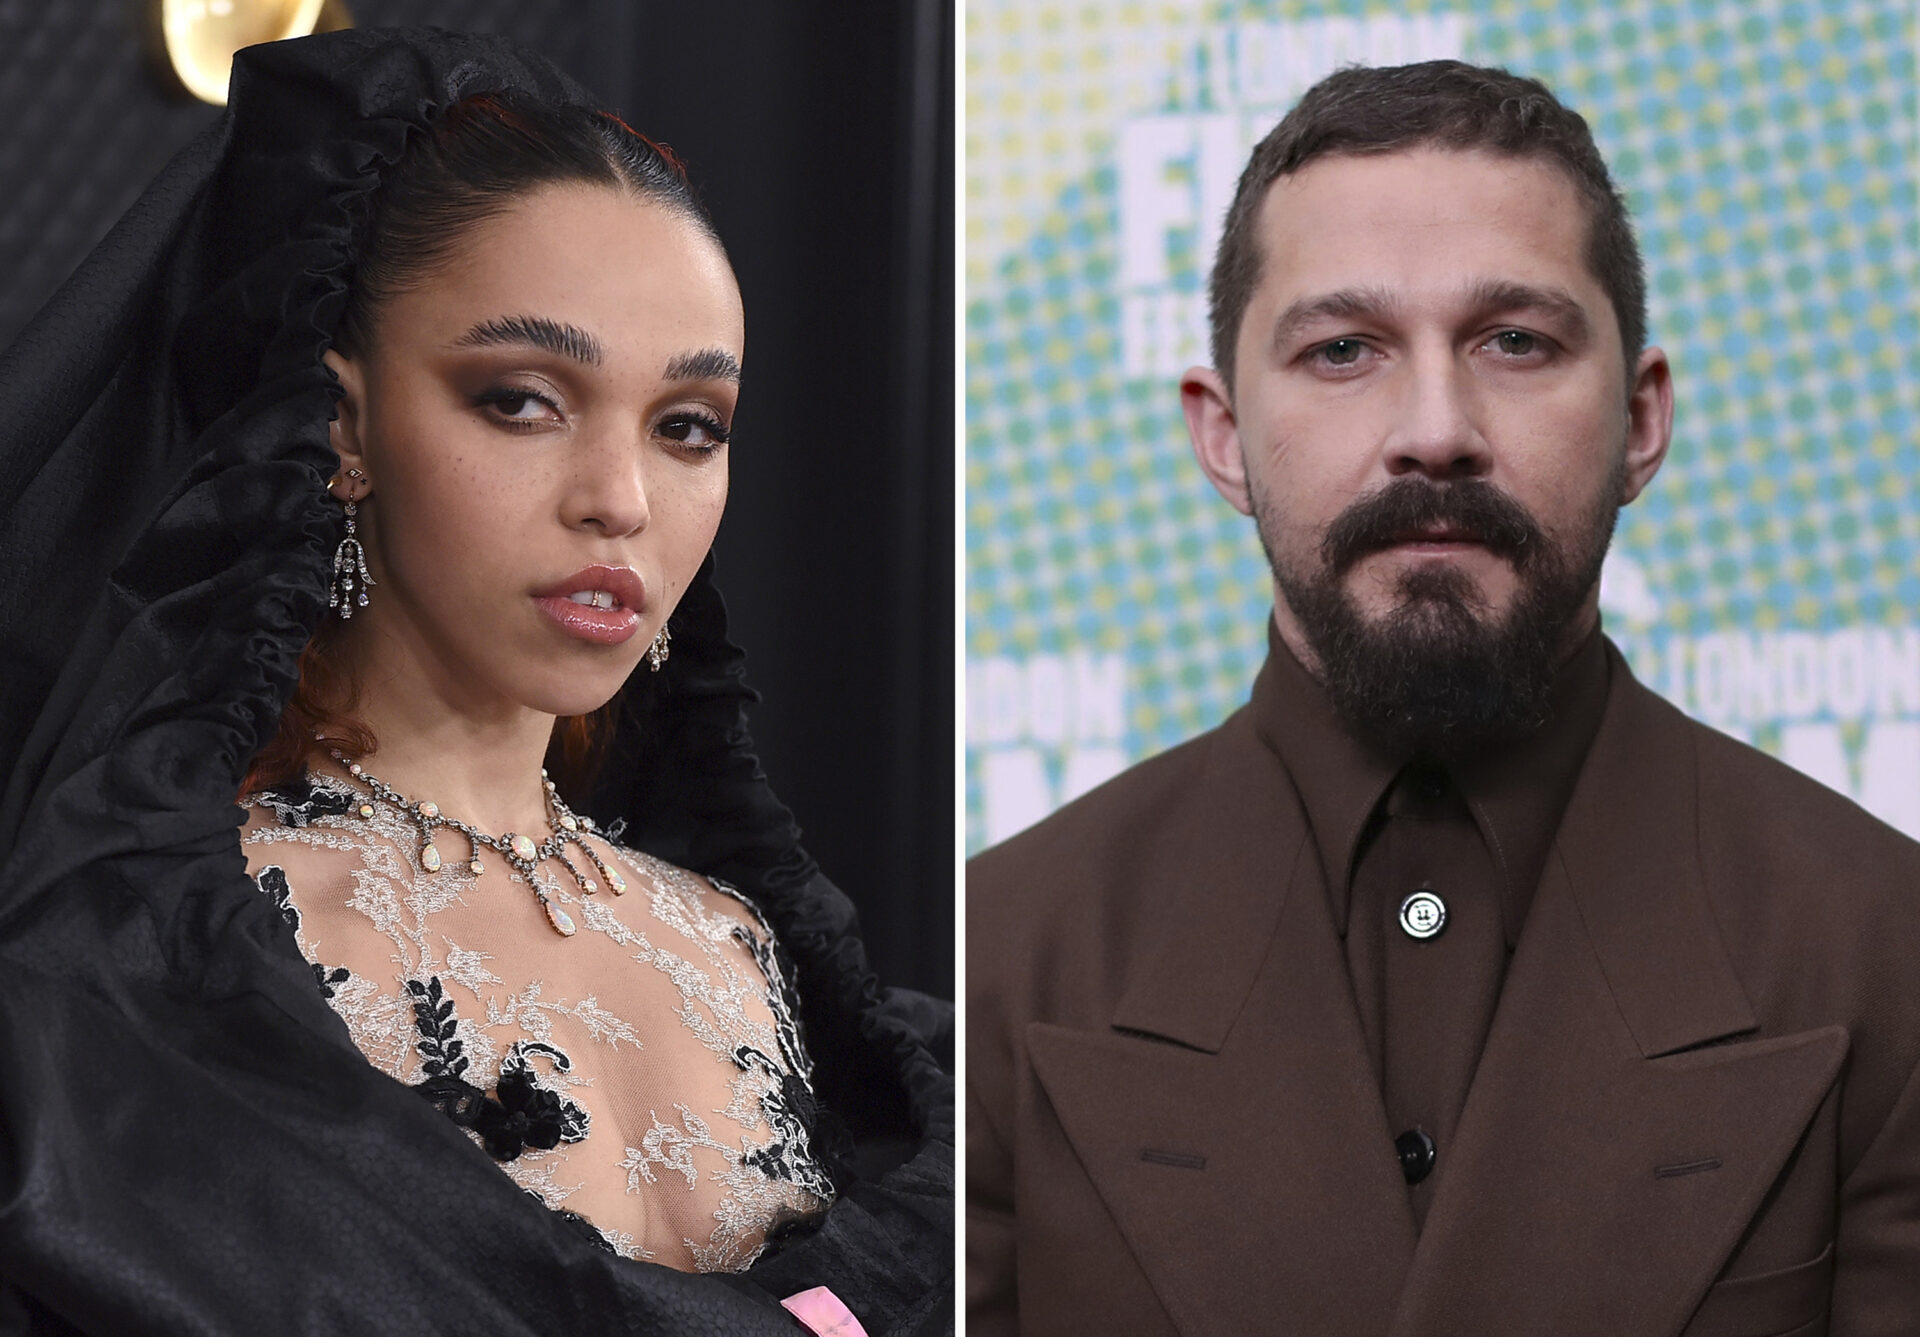 This combination photo shows FKA twigs, left, at the 62nd annual Grammy Awards on Jan. 26, 2020, in Los Angeles and Shia LaBeouf at the premiere of "The Peanut Butter Falcon" during the London Film Festival on Oct. 3, 2019. FKA twigs filed a lawsuit Friday, Dec. 11, 2020, alleging that LaBeouf was physically and emotionally abusive during a relationship in 2018 and 2019, saying the experience was part of a pattern of terrorizing women for the 34-year-old actor. (AP Photo)